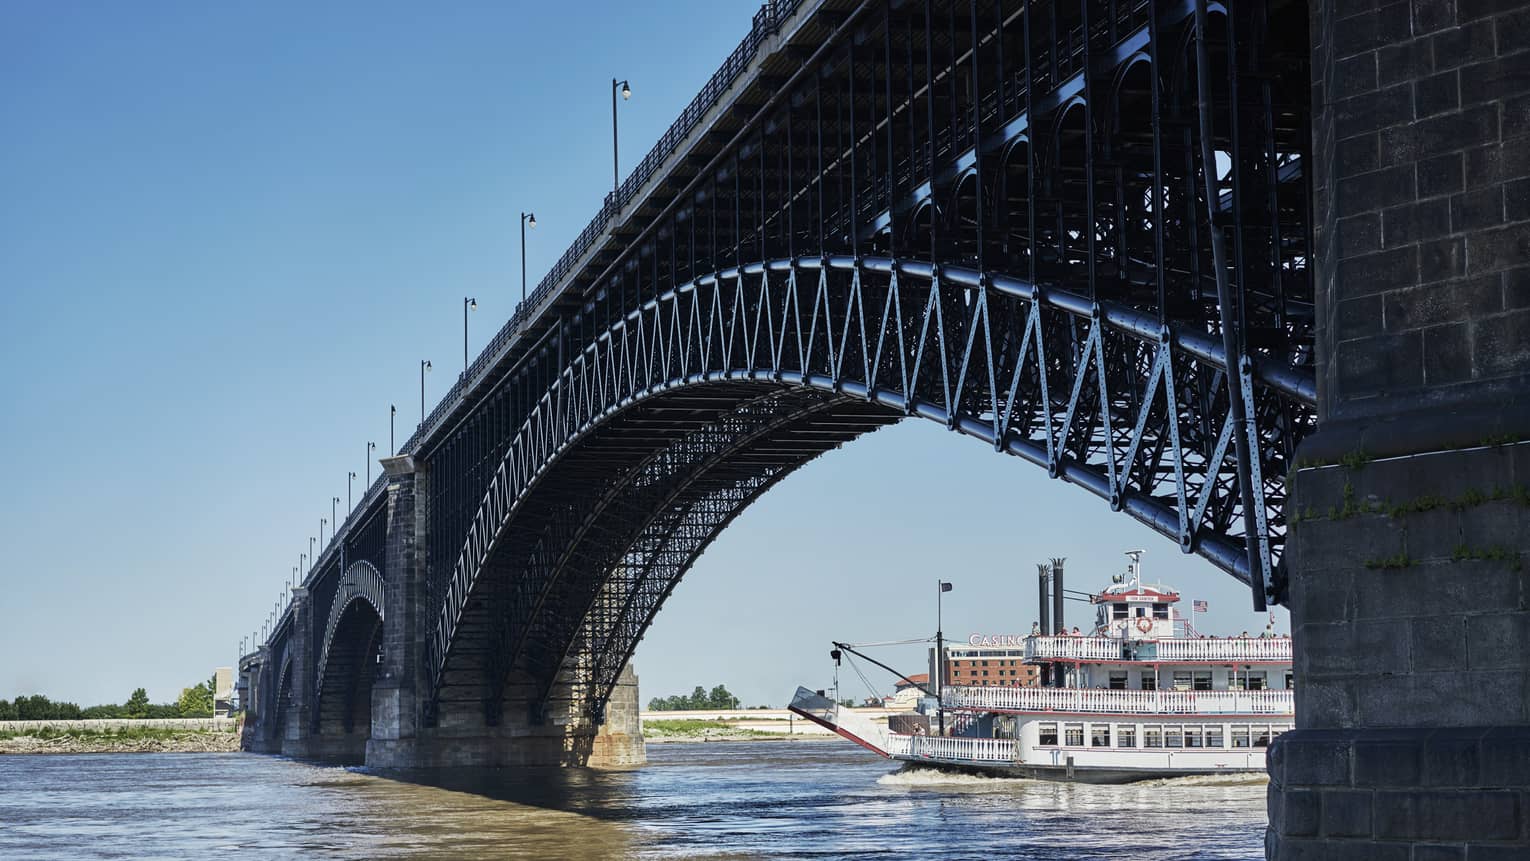 A river boat going under a large metal bridge on a bright day on a river.